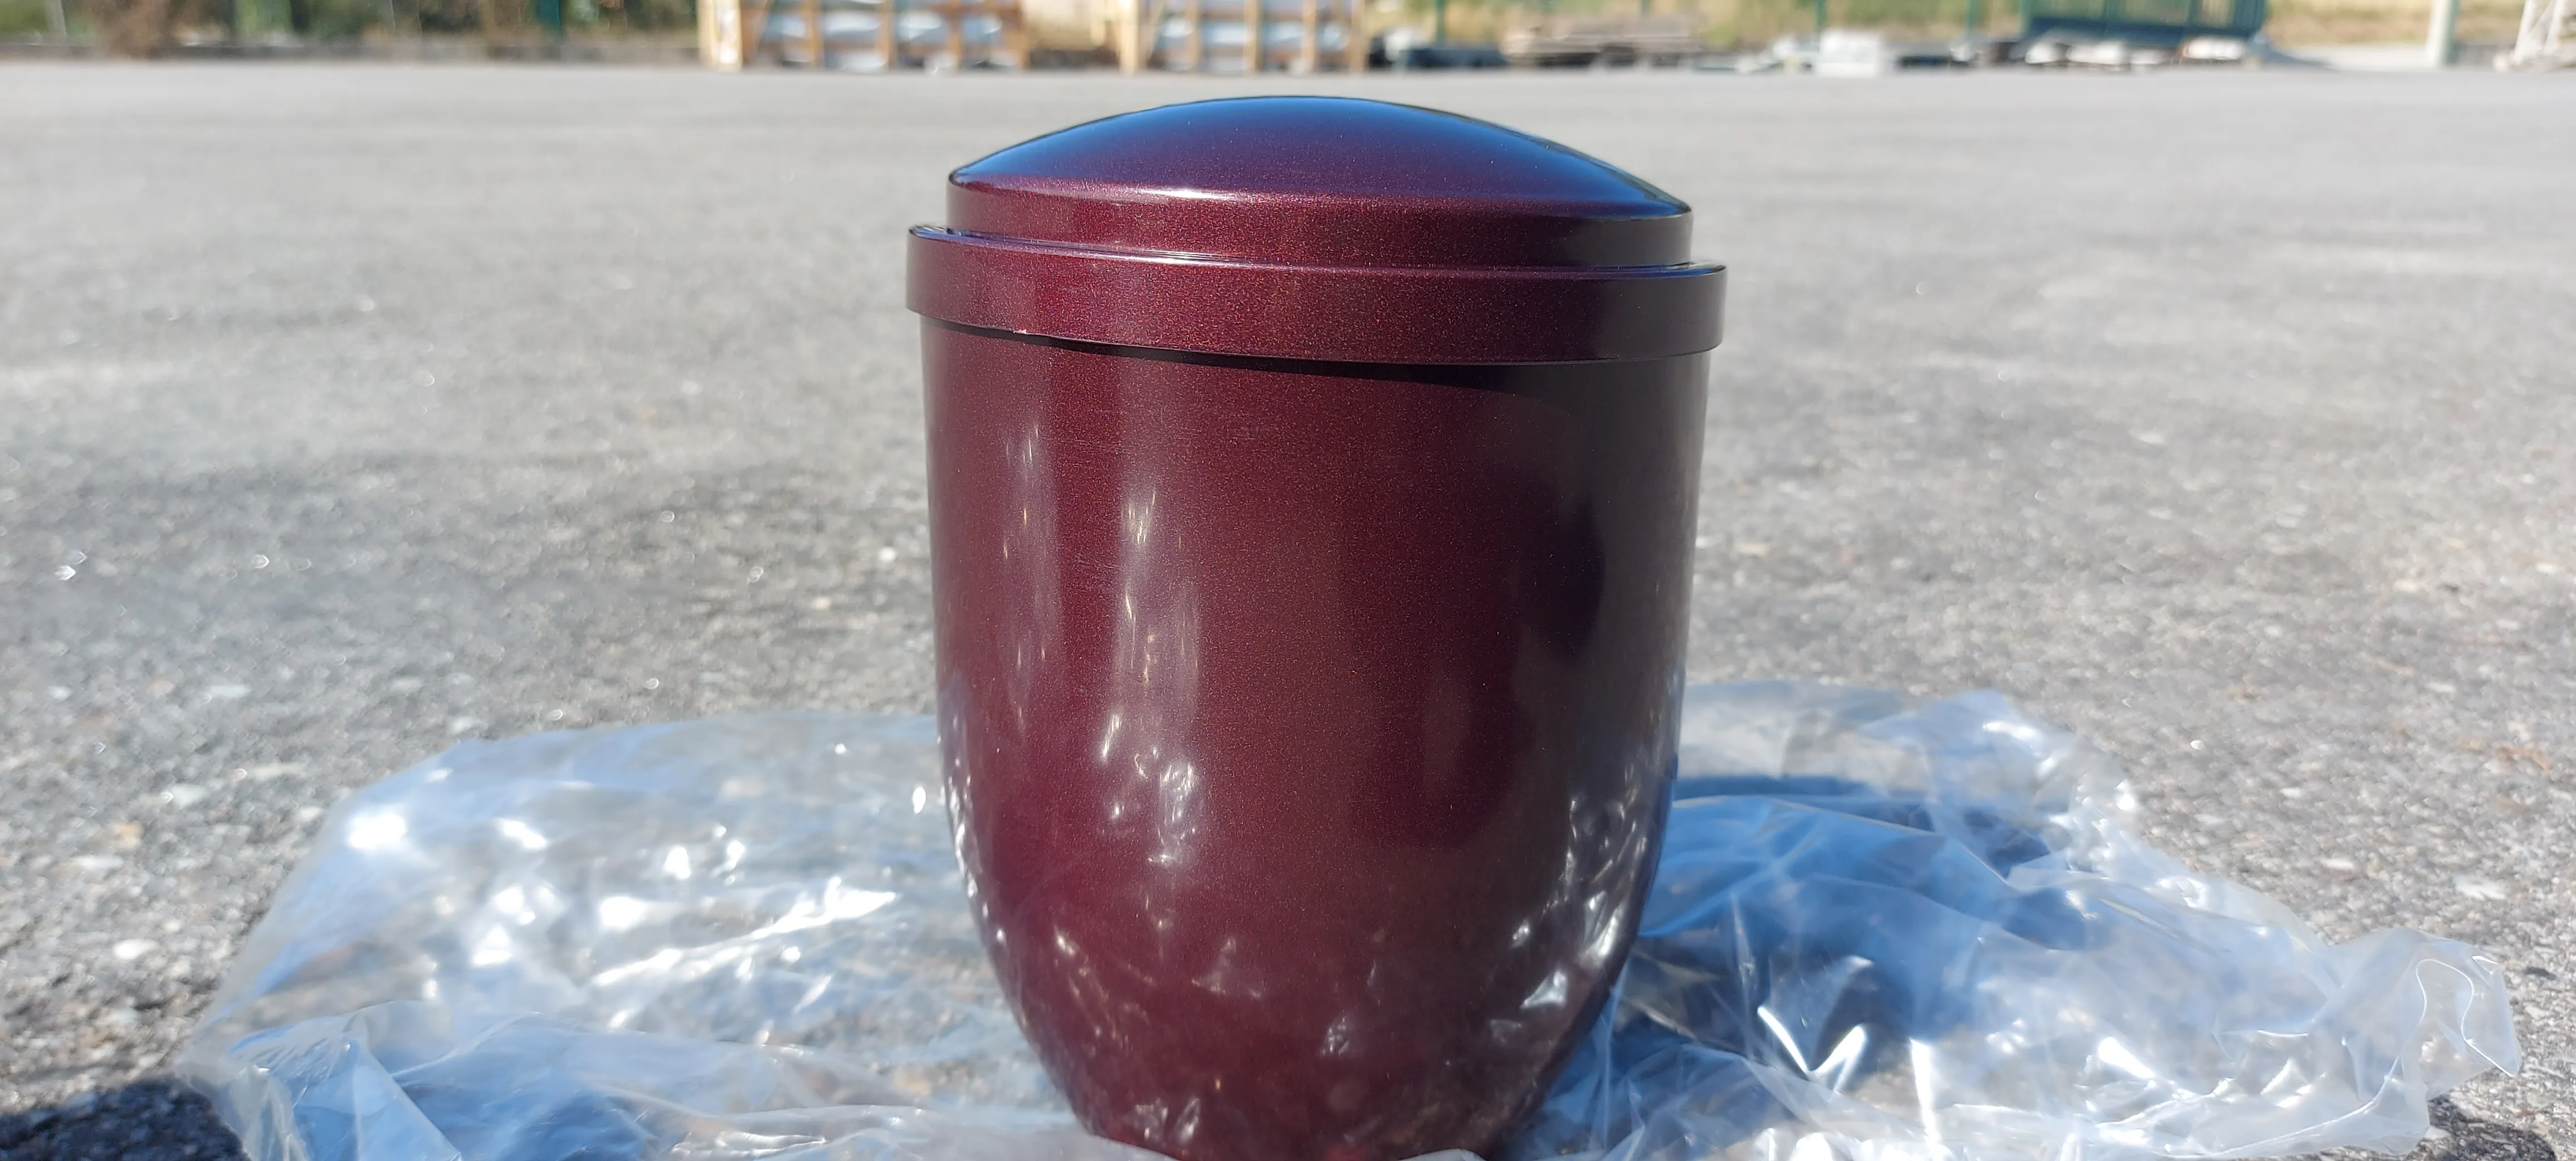 Bordeaux Color Funeral Ash Urn For Cremation in 3.3L and ABS plastic